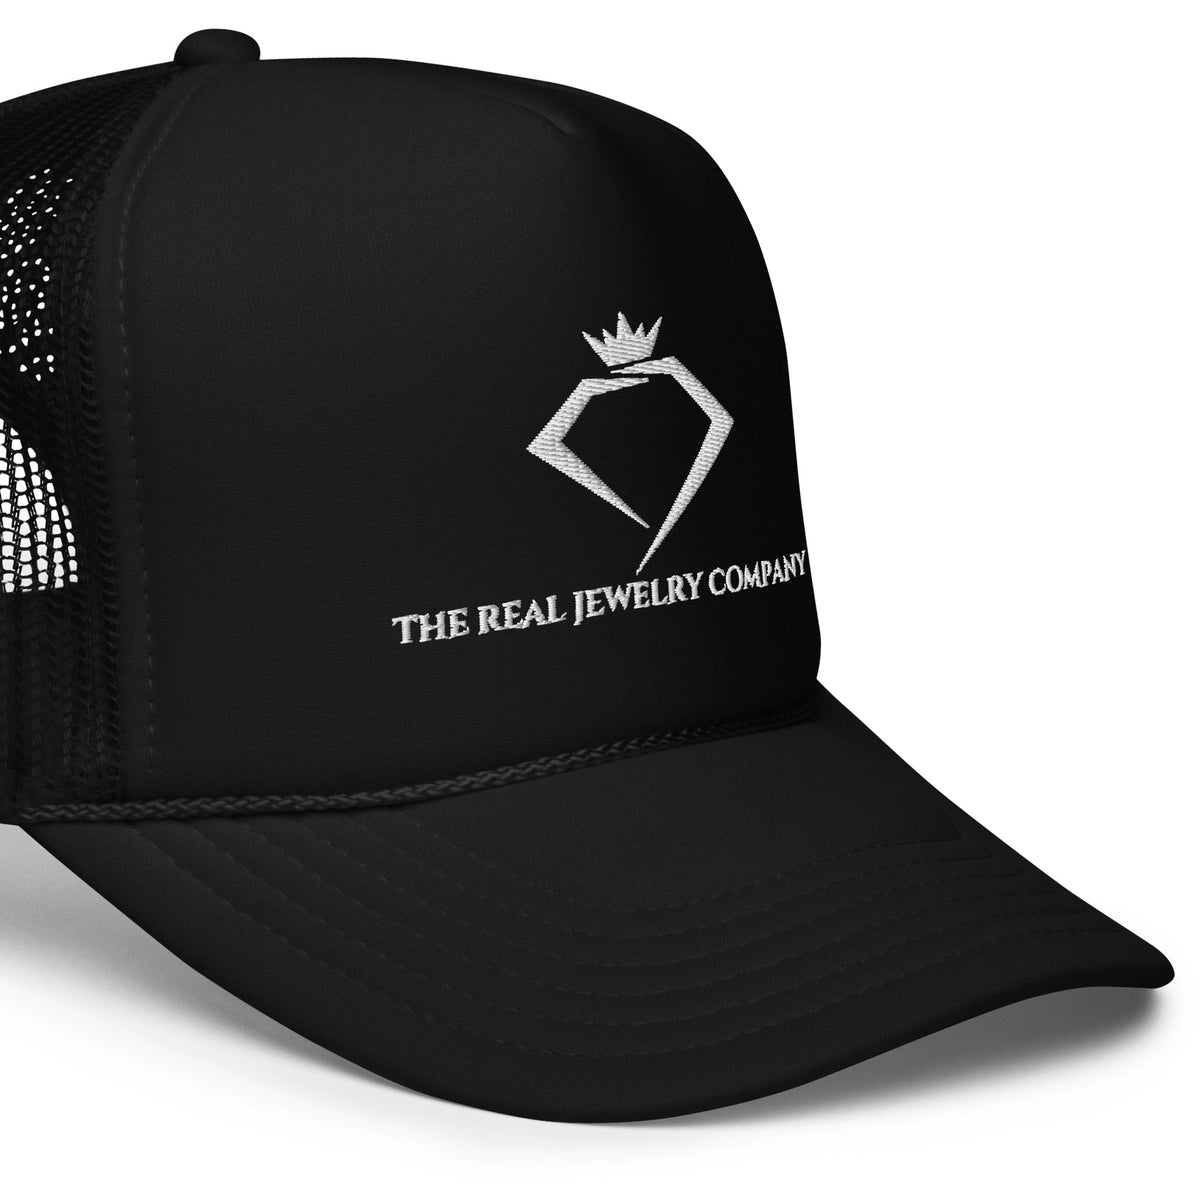 Foam trucker hat - The Real Jewelry CompanyThe Real Jewelry Company